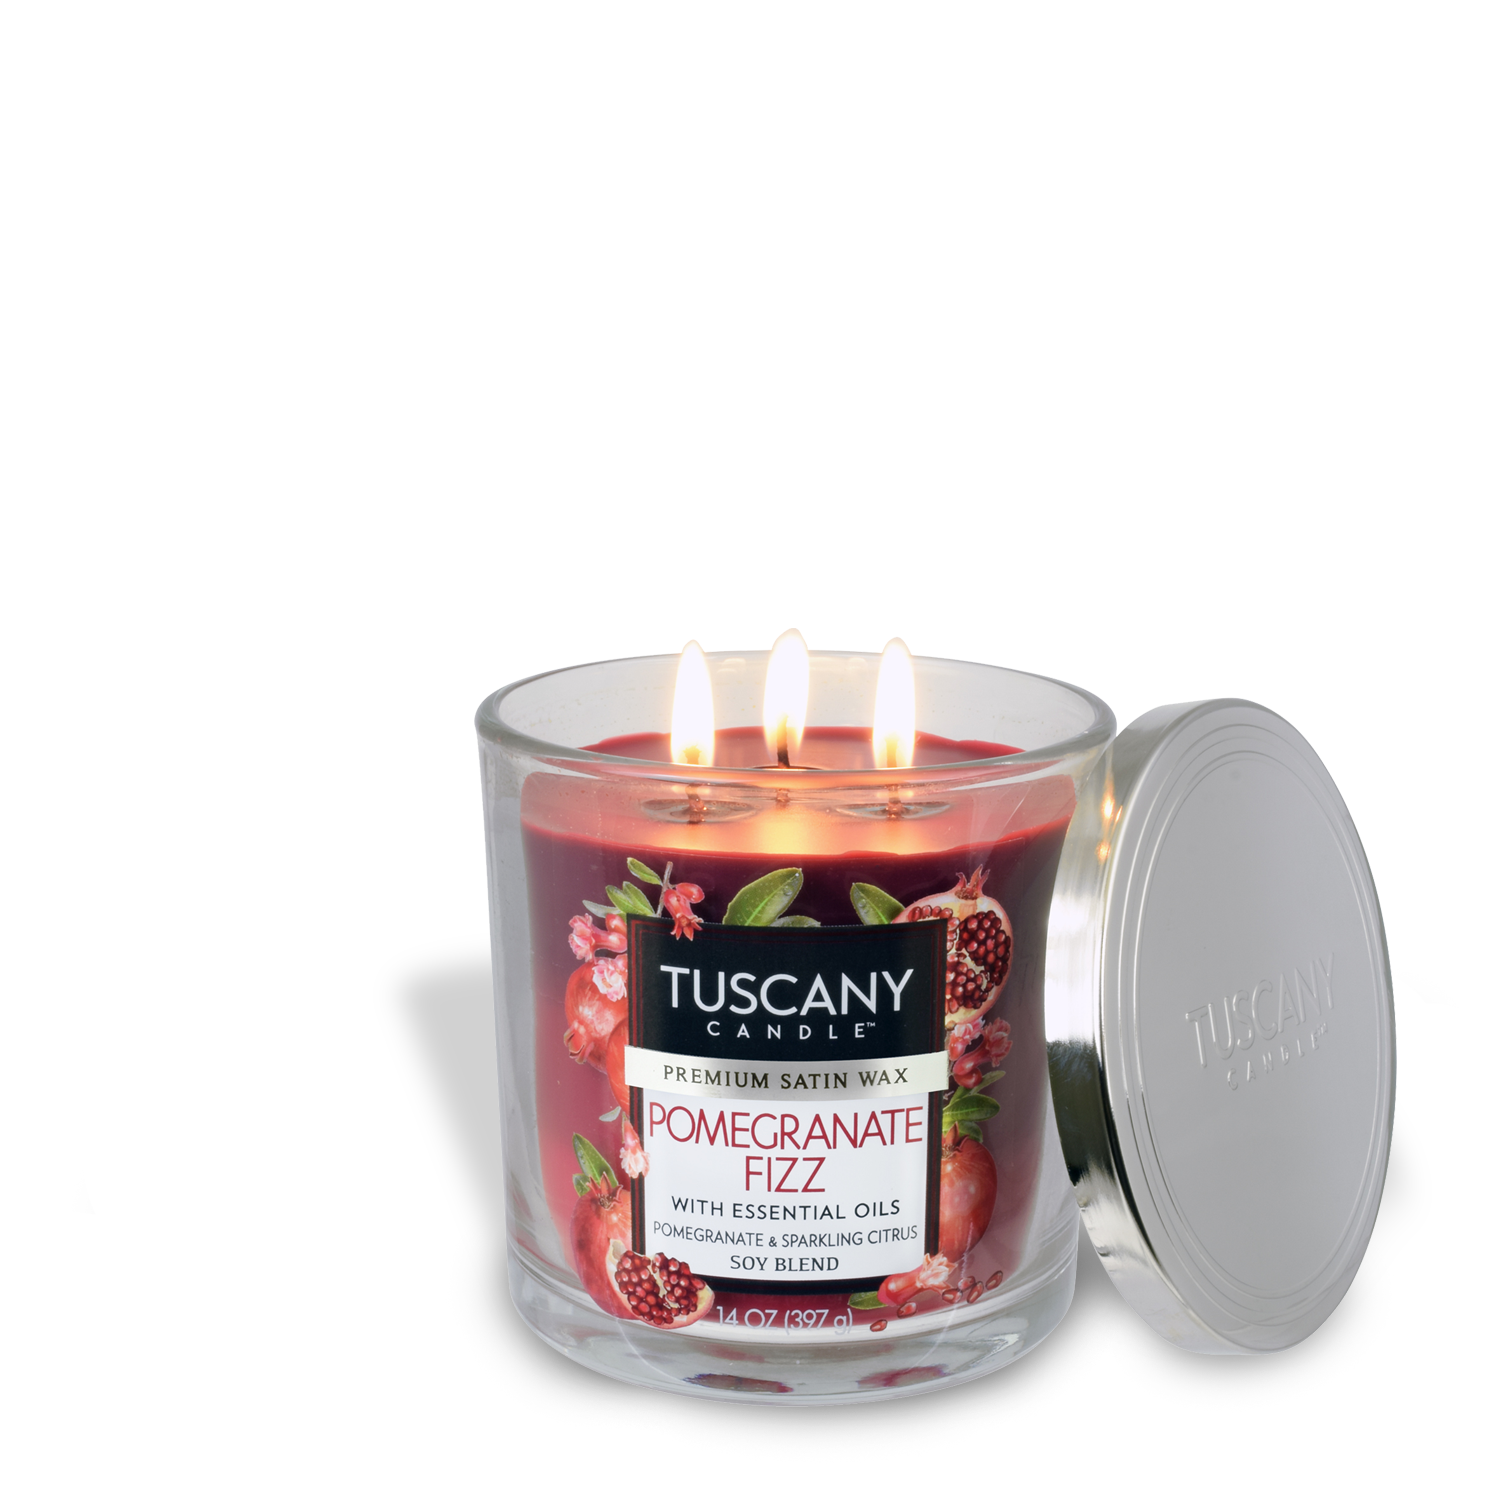 Fragrant Pomegranate Fizz Long-Lasting Scented Jar Candle (14 oz) by Tuscany Candle.